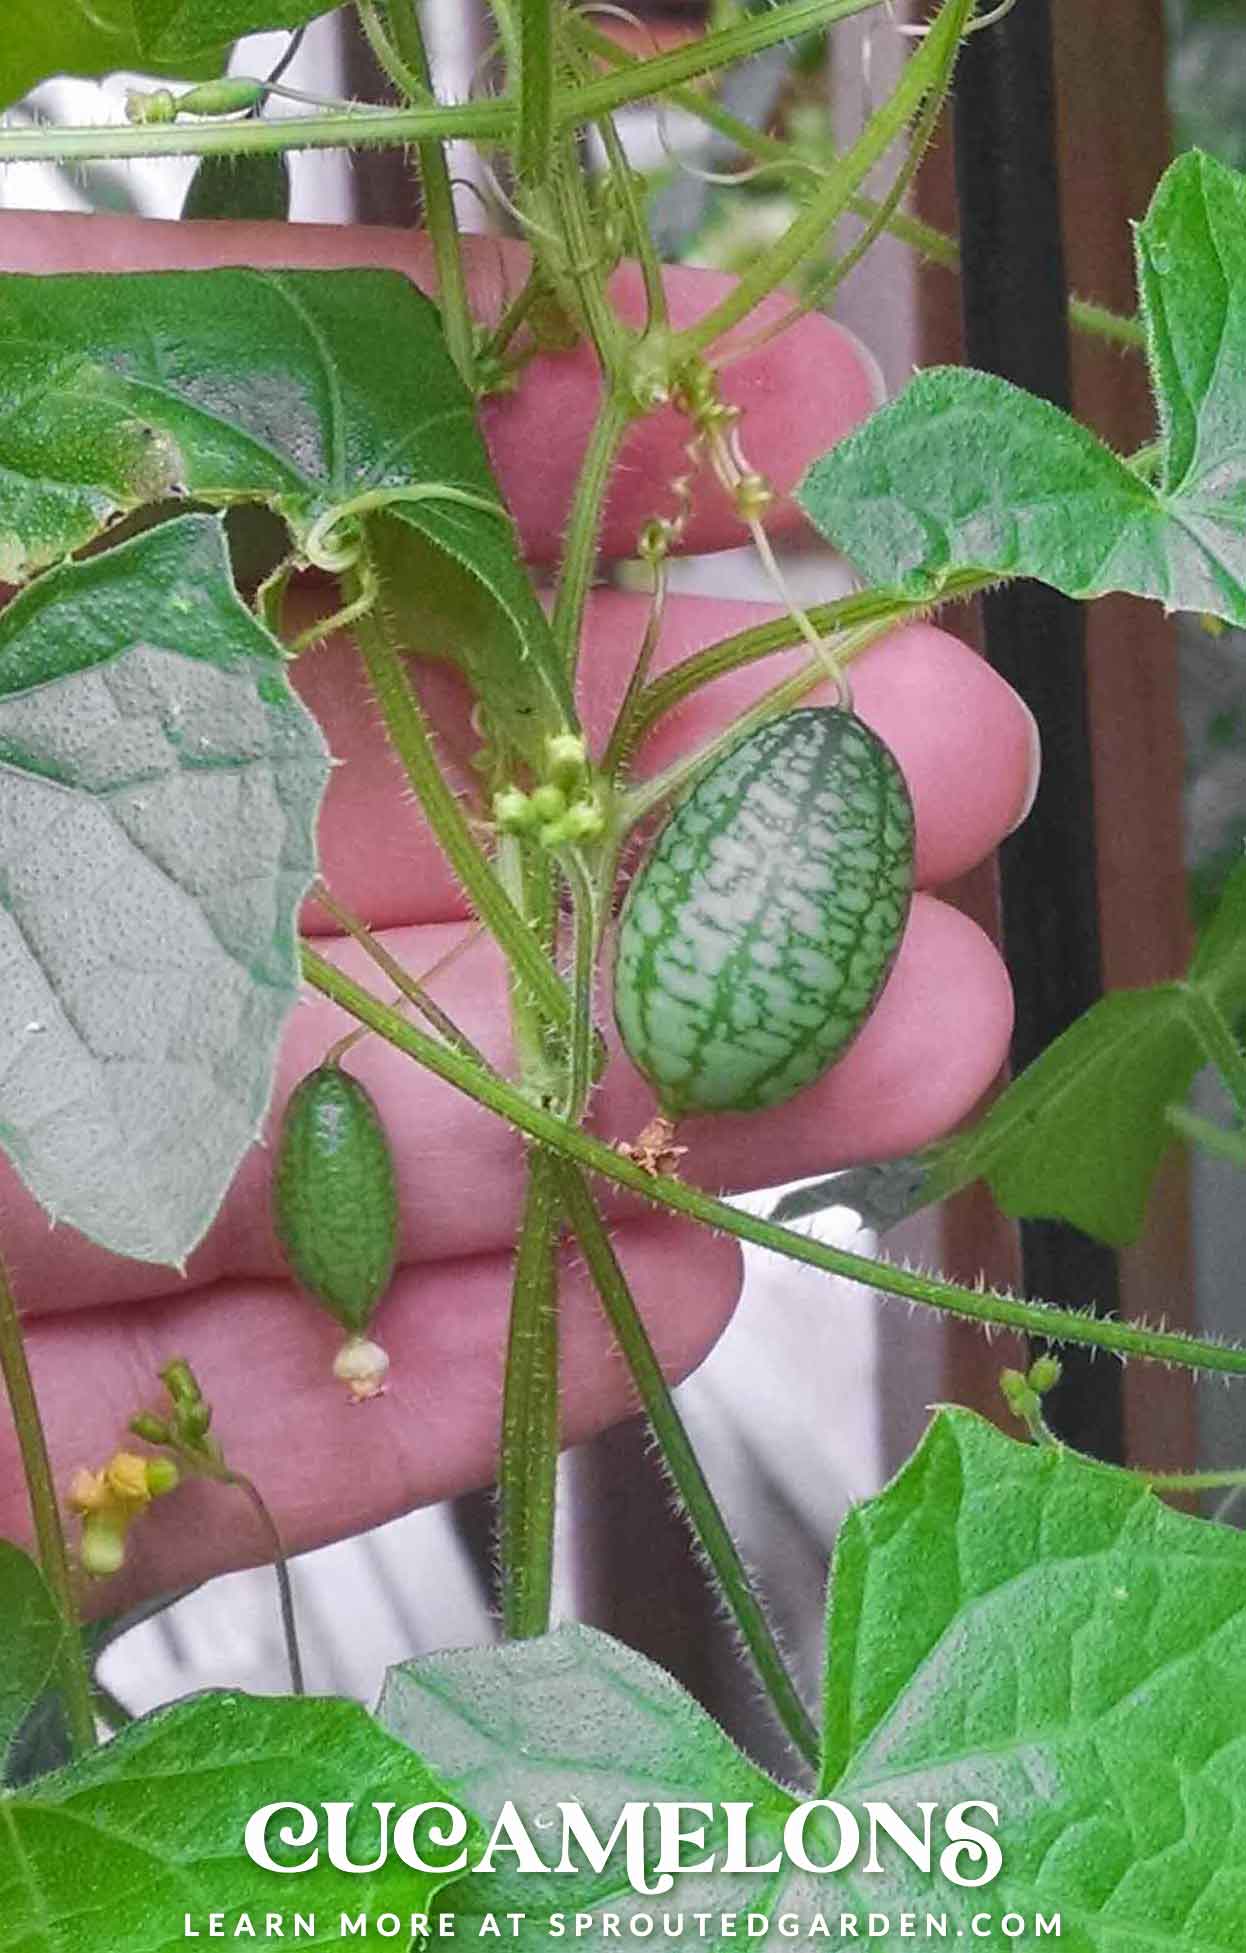 Cucamelons on the vine.